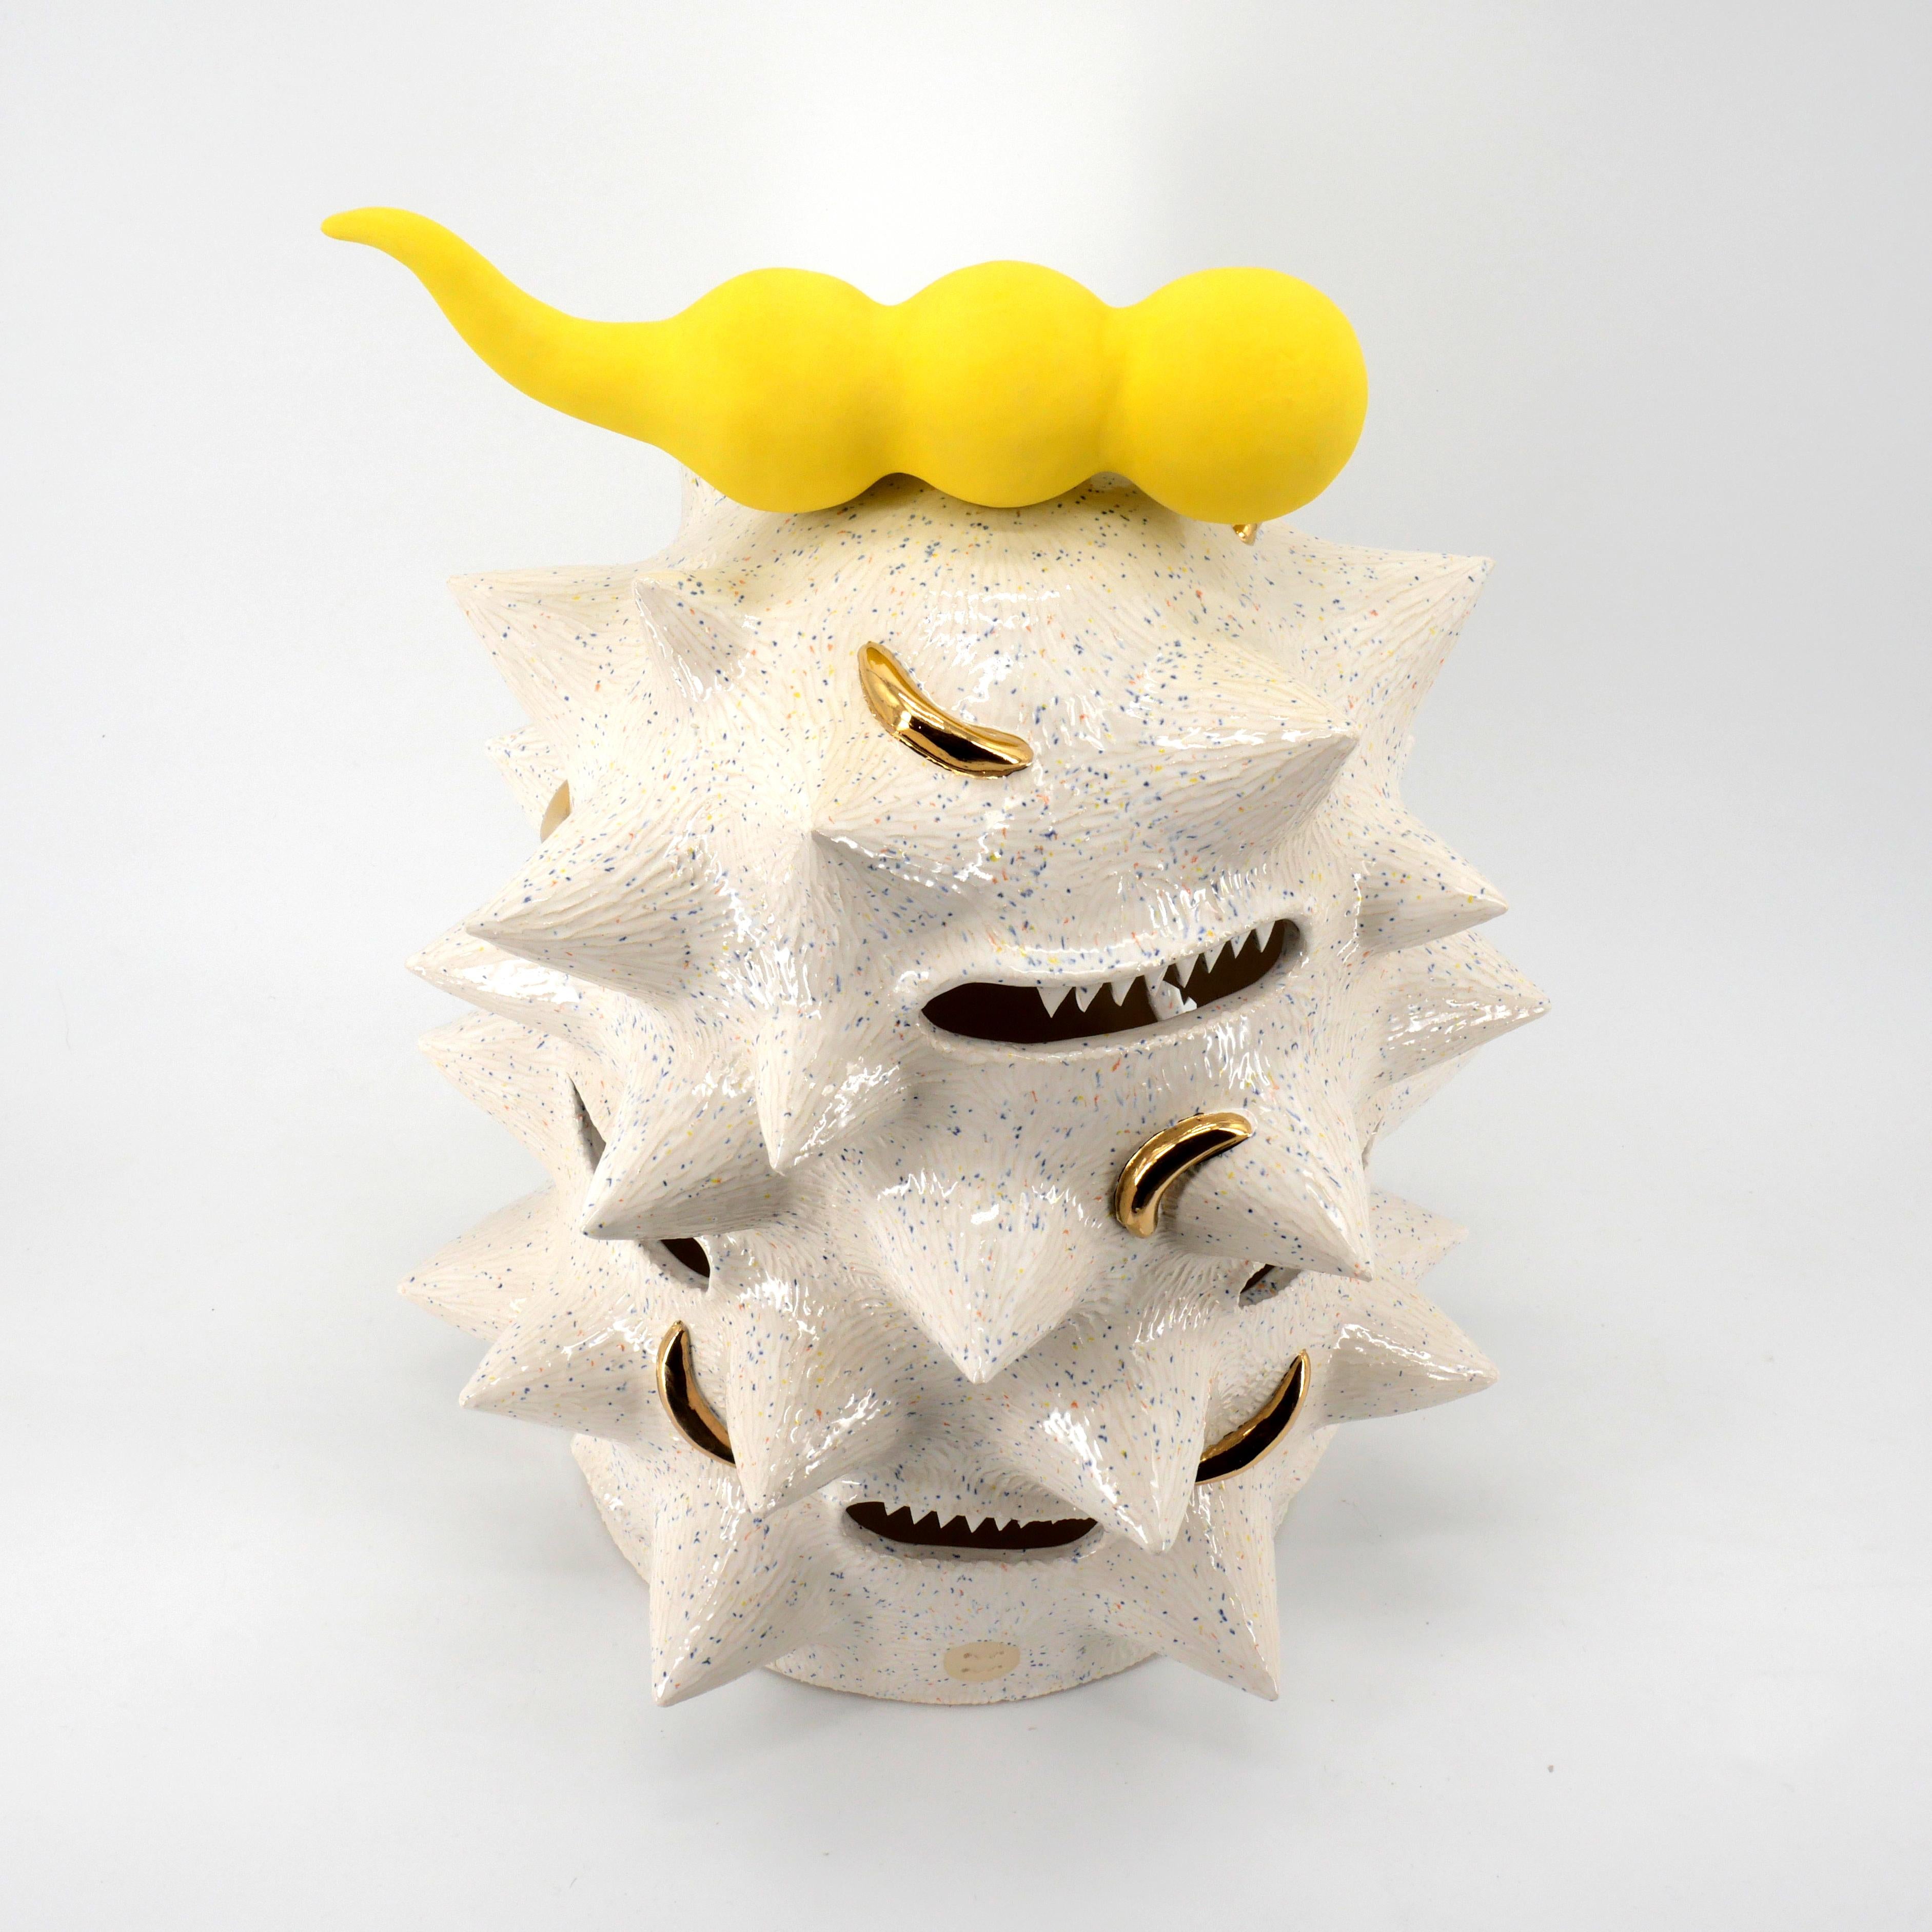 'Banana Eats You' Playful Monster Ceramic Decorative Sculpture by Kartini Thomas In New Condition For Sale In Amsterdam, NL